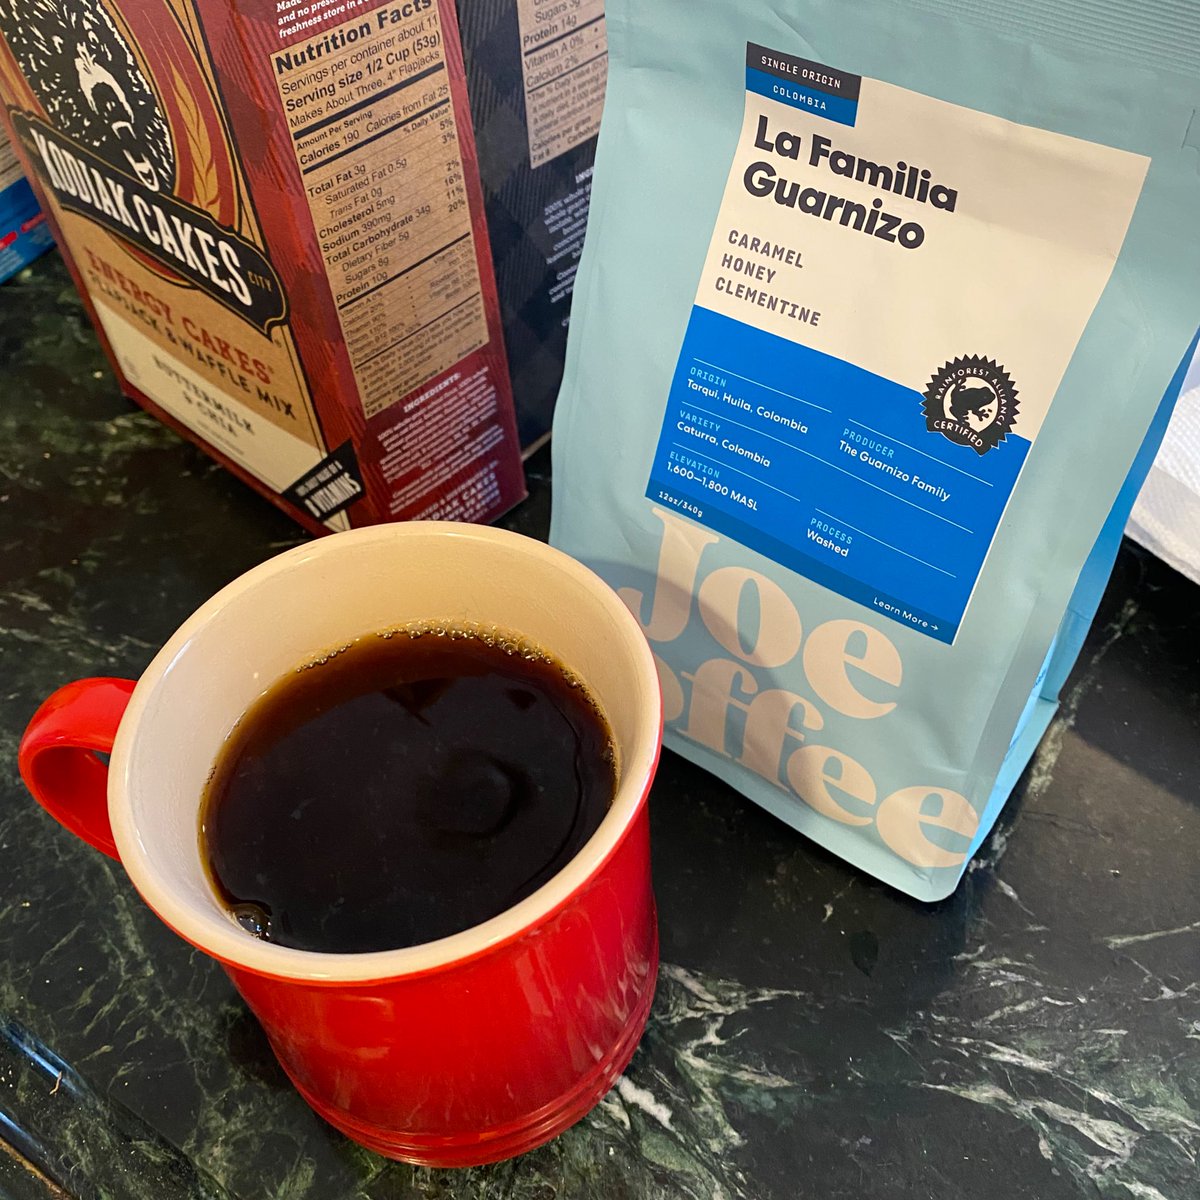 Joe Coffee La Famailia GuarnizoThe best coffee by one of my favorite NYC roasters. An absolute delight. Can’t get enough of it!